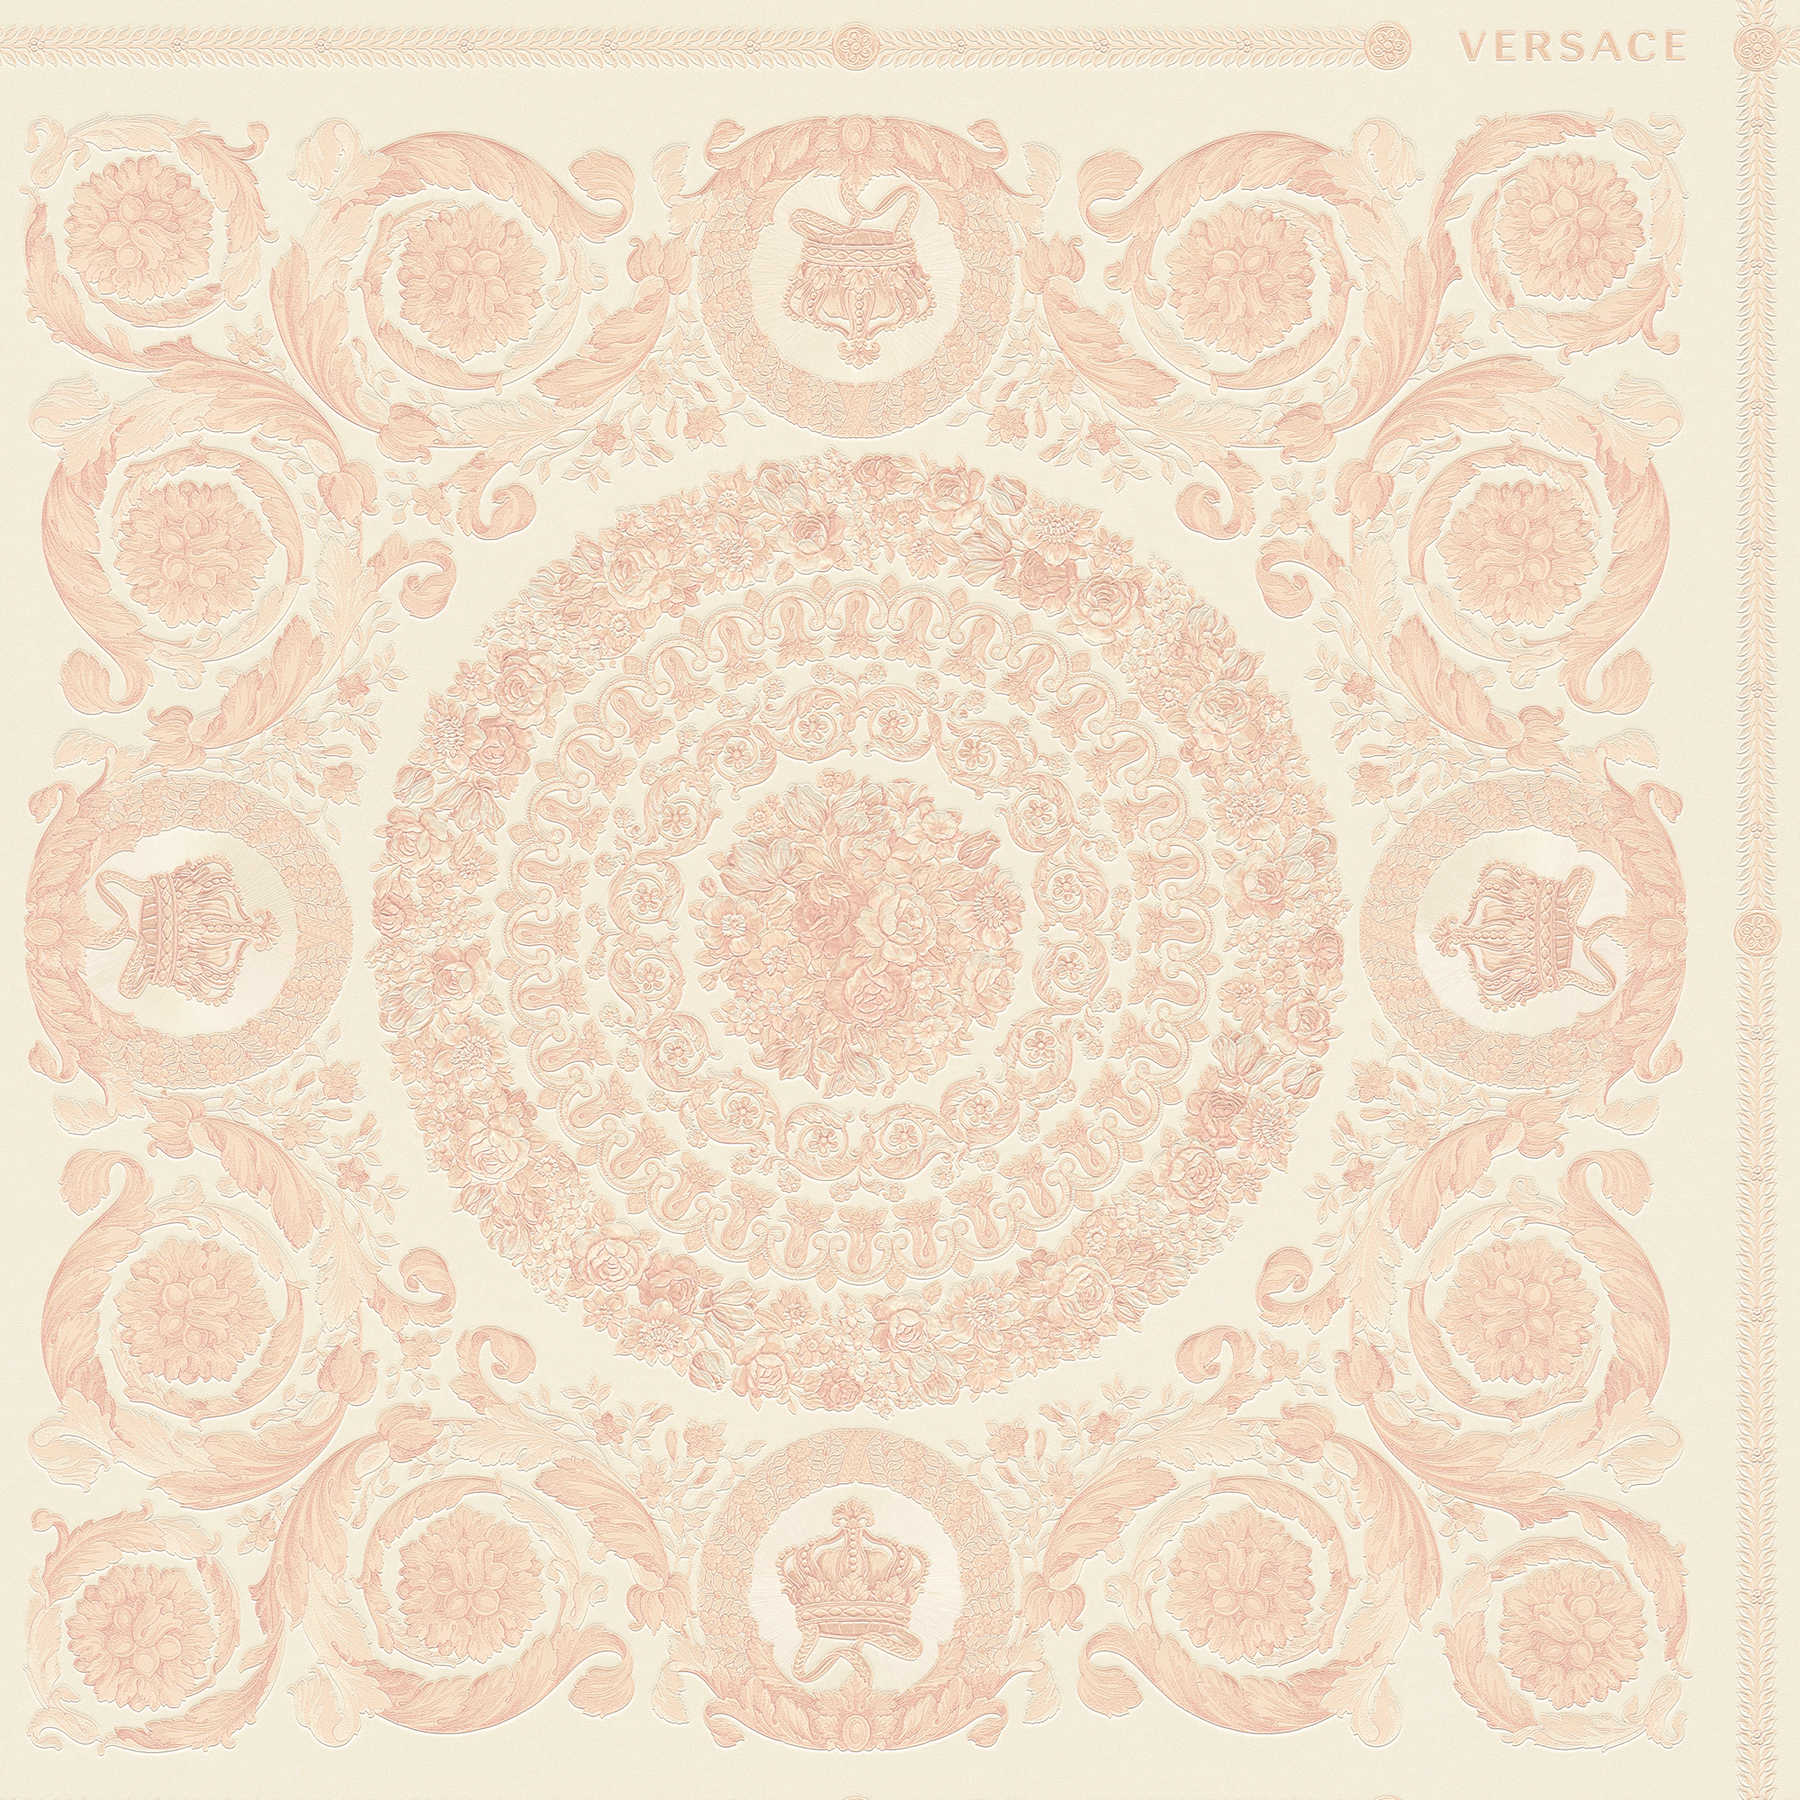 Luxury VERSACE Home wallpaper crowns & roses - pink, white
